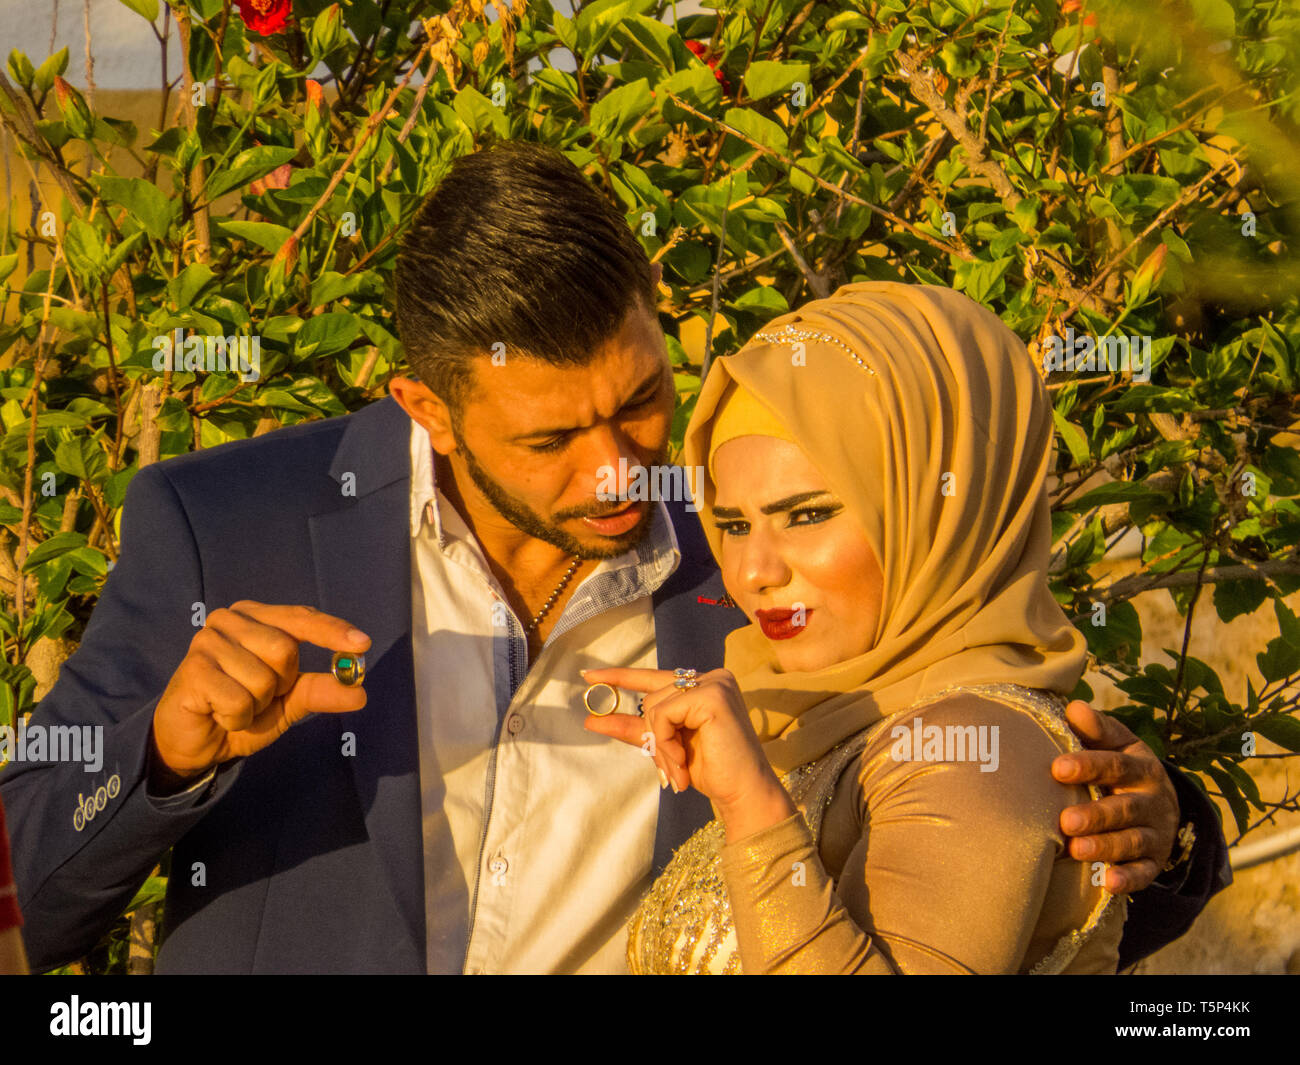 TYRE, LEBANON - MAY 21, 2017:  Unidentified Arabic couple posing for a photographer on their wedding day. Stock Photo